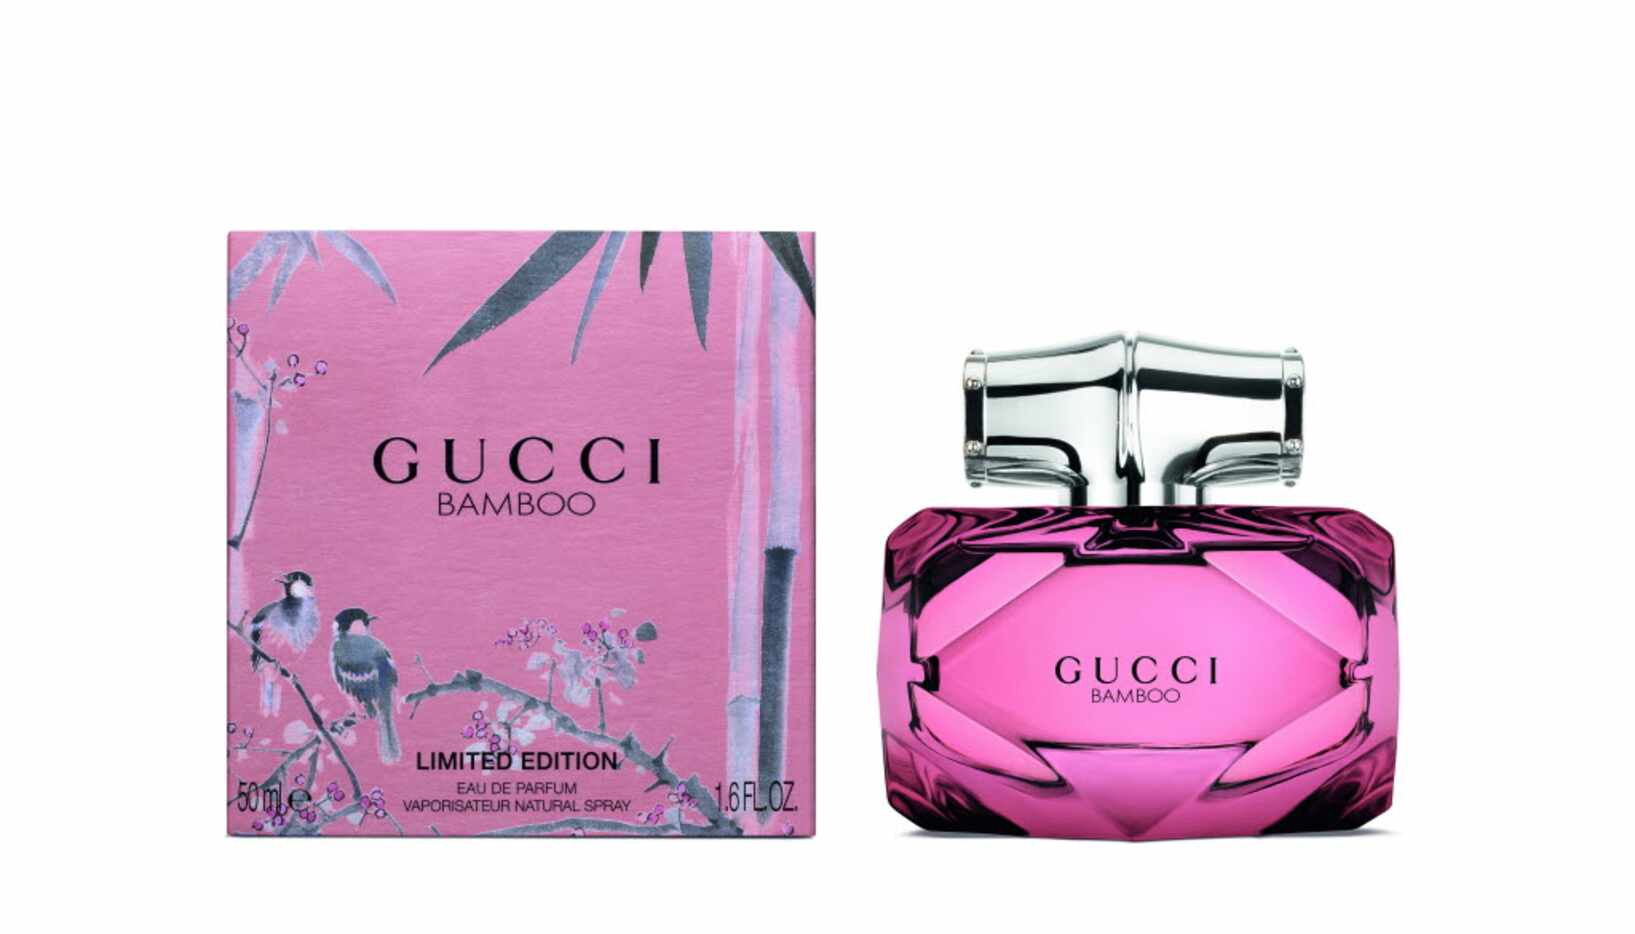 Gucci Bamboo Limited Edition, a woody floral fragrance, starts at $78, Macy's